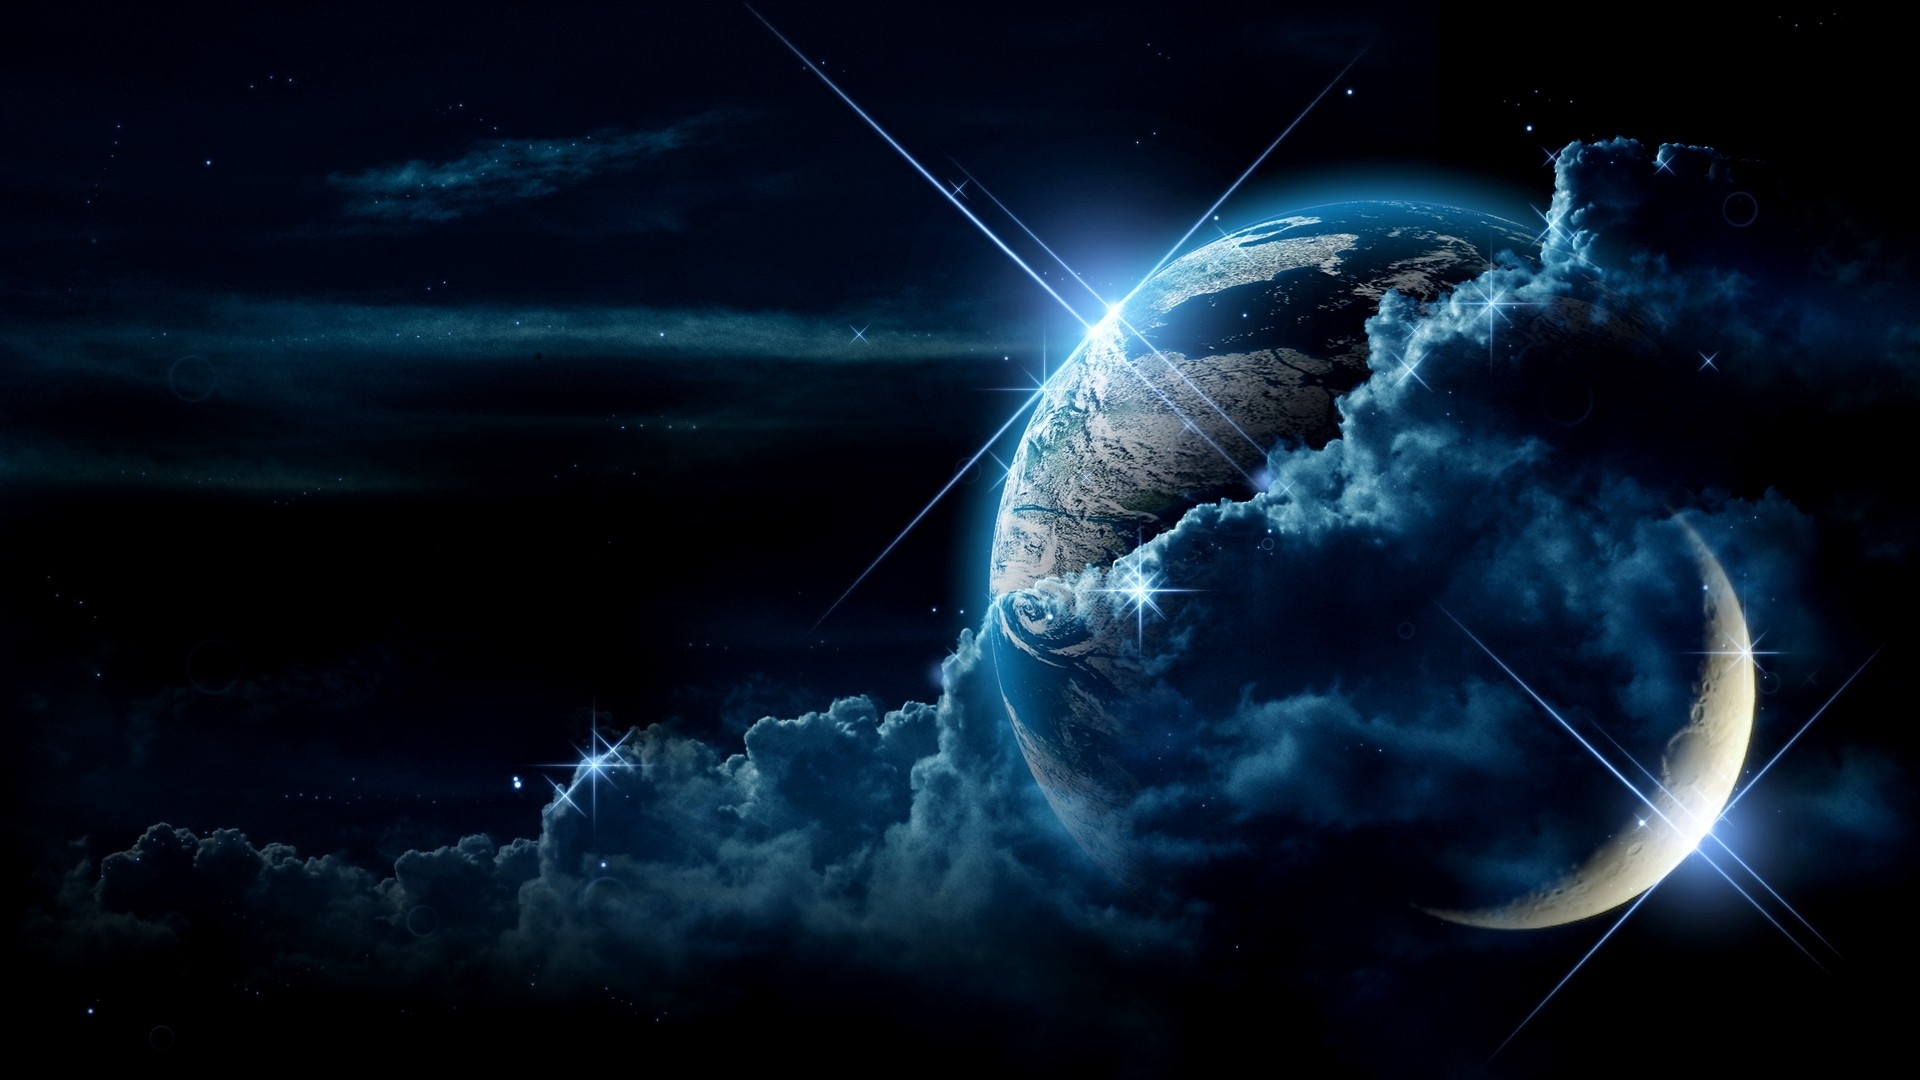  space planets moon earth planet sci fi stars wallpaper background